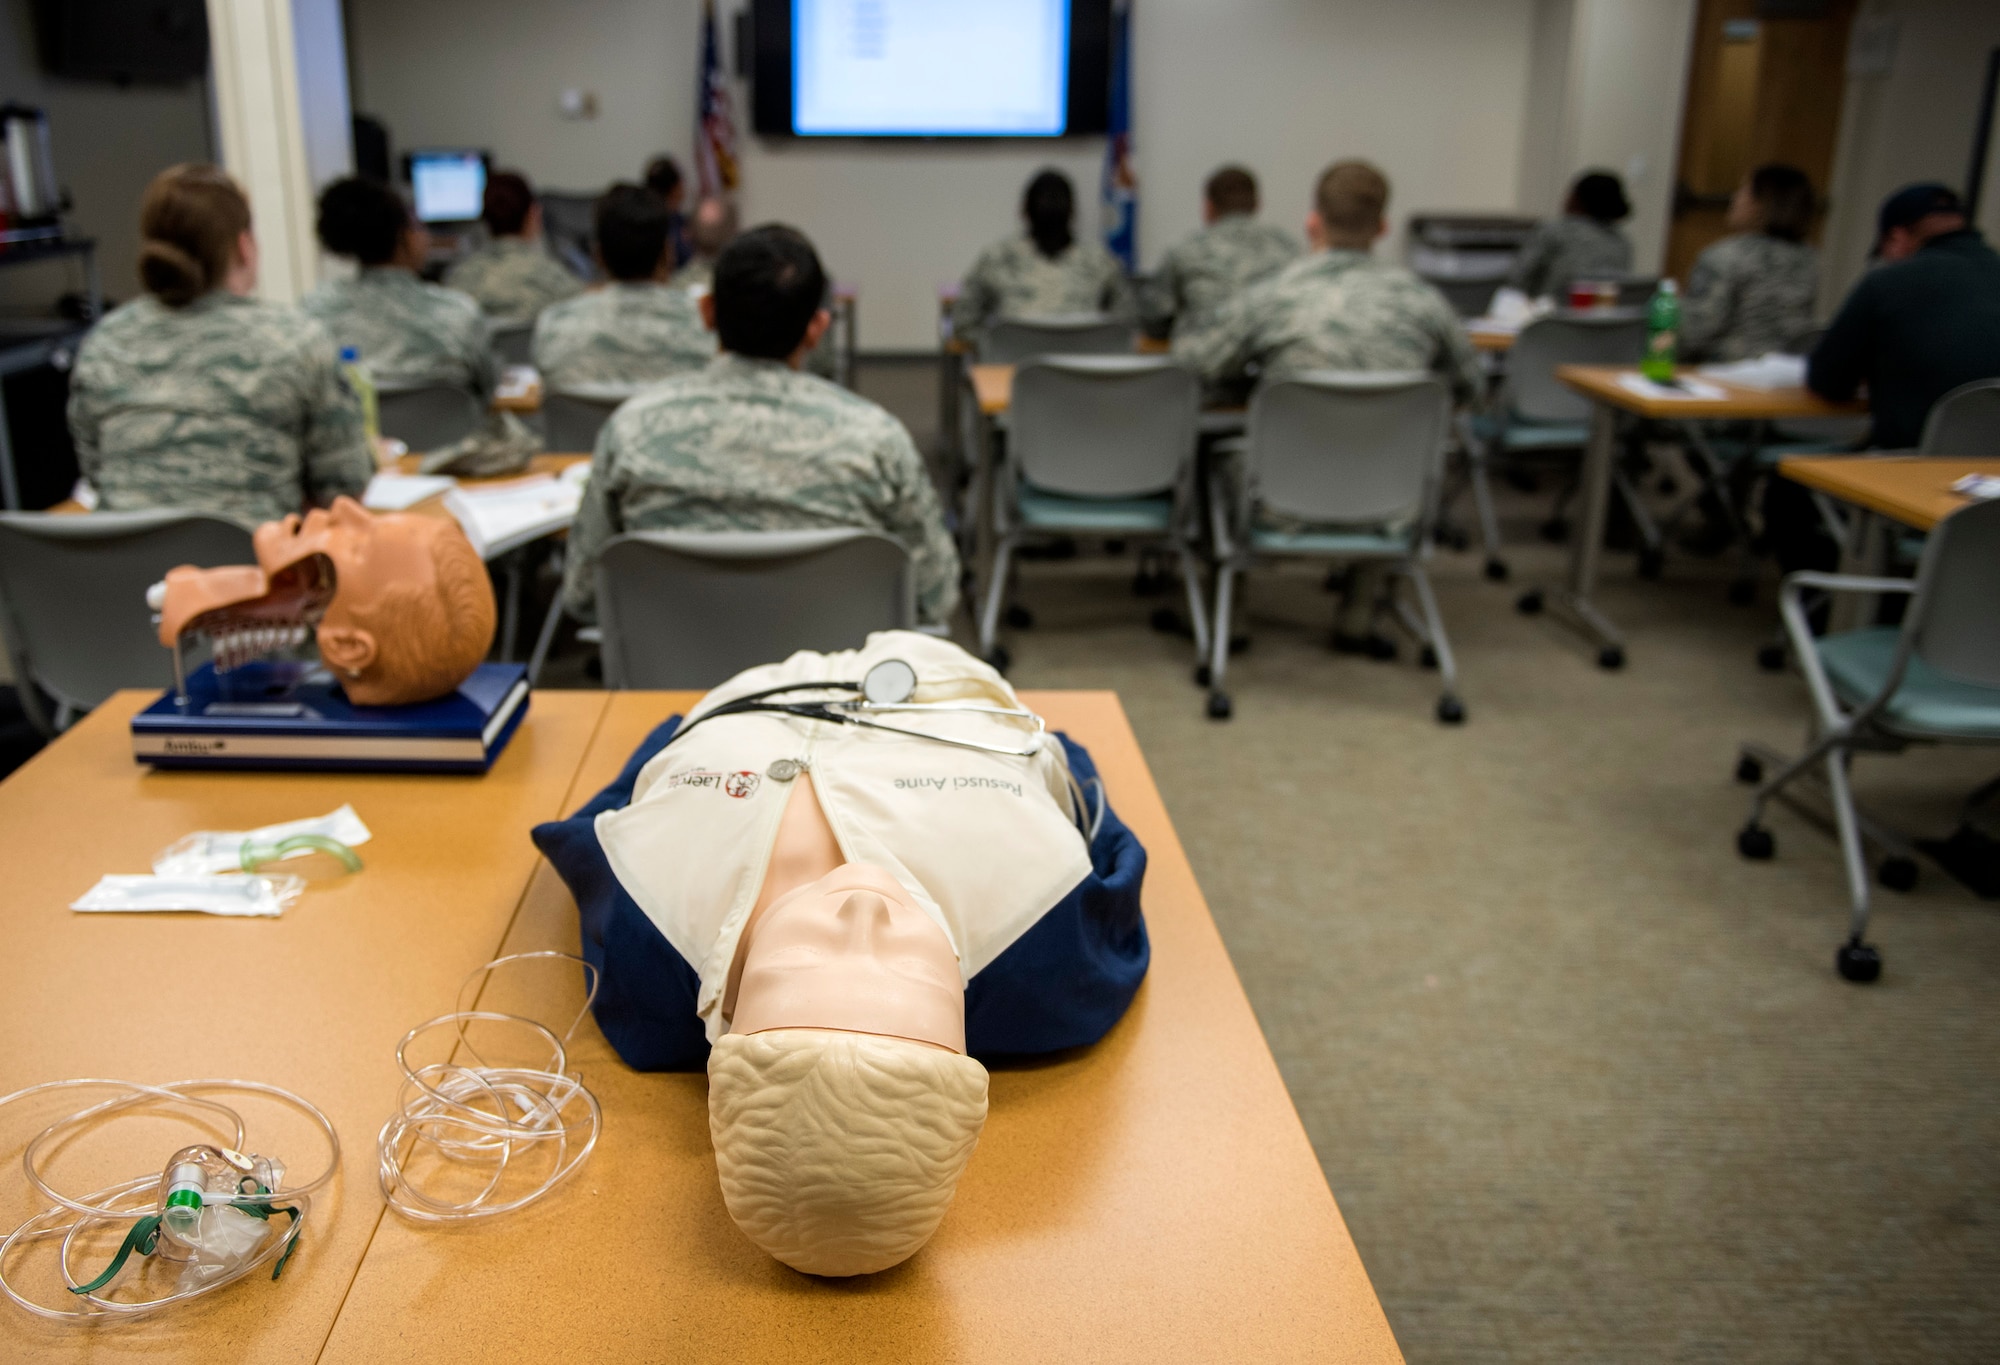 U.S. Air Force guard, reserve and active-duty Airmen and firefighters interact during an Emergency Medical Technician refresher course, Oct. 31, 2016, at Moody Air Force Base, Ga. The week-long training must be completed every two years. (U.S. Air Force photo by Airman 1st Class Janiqua P. Robinson)